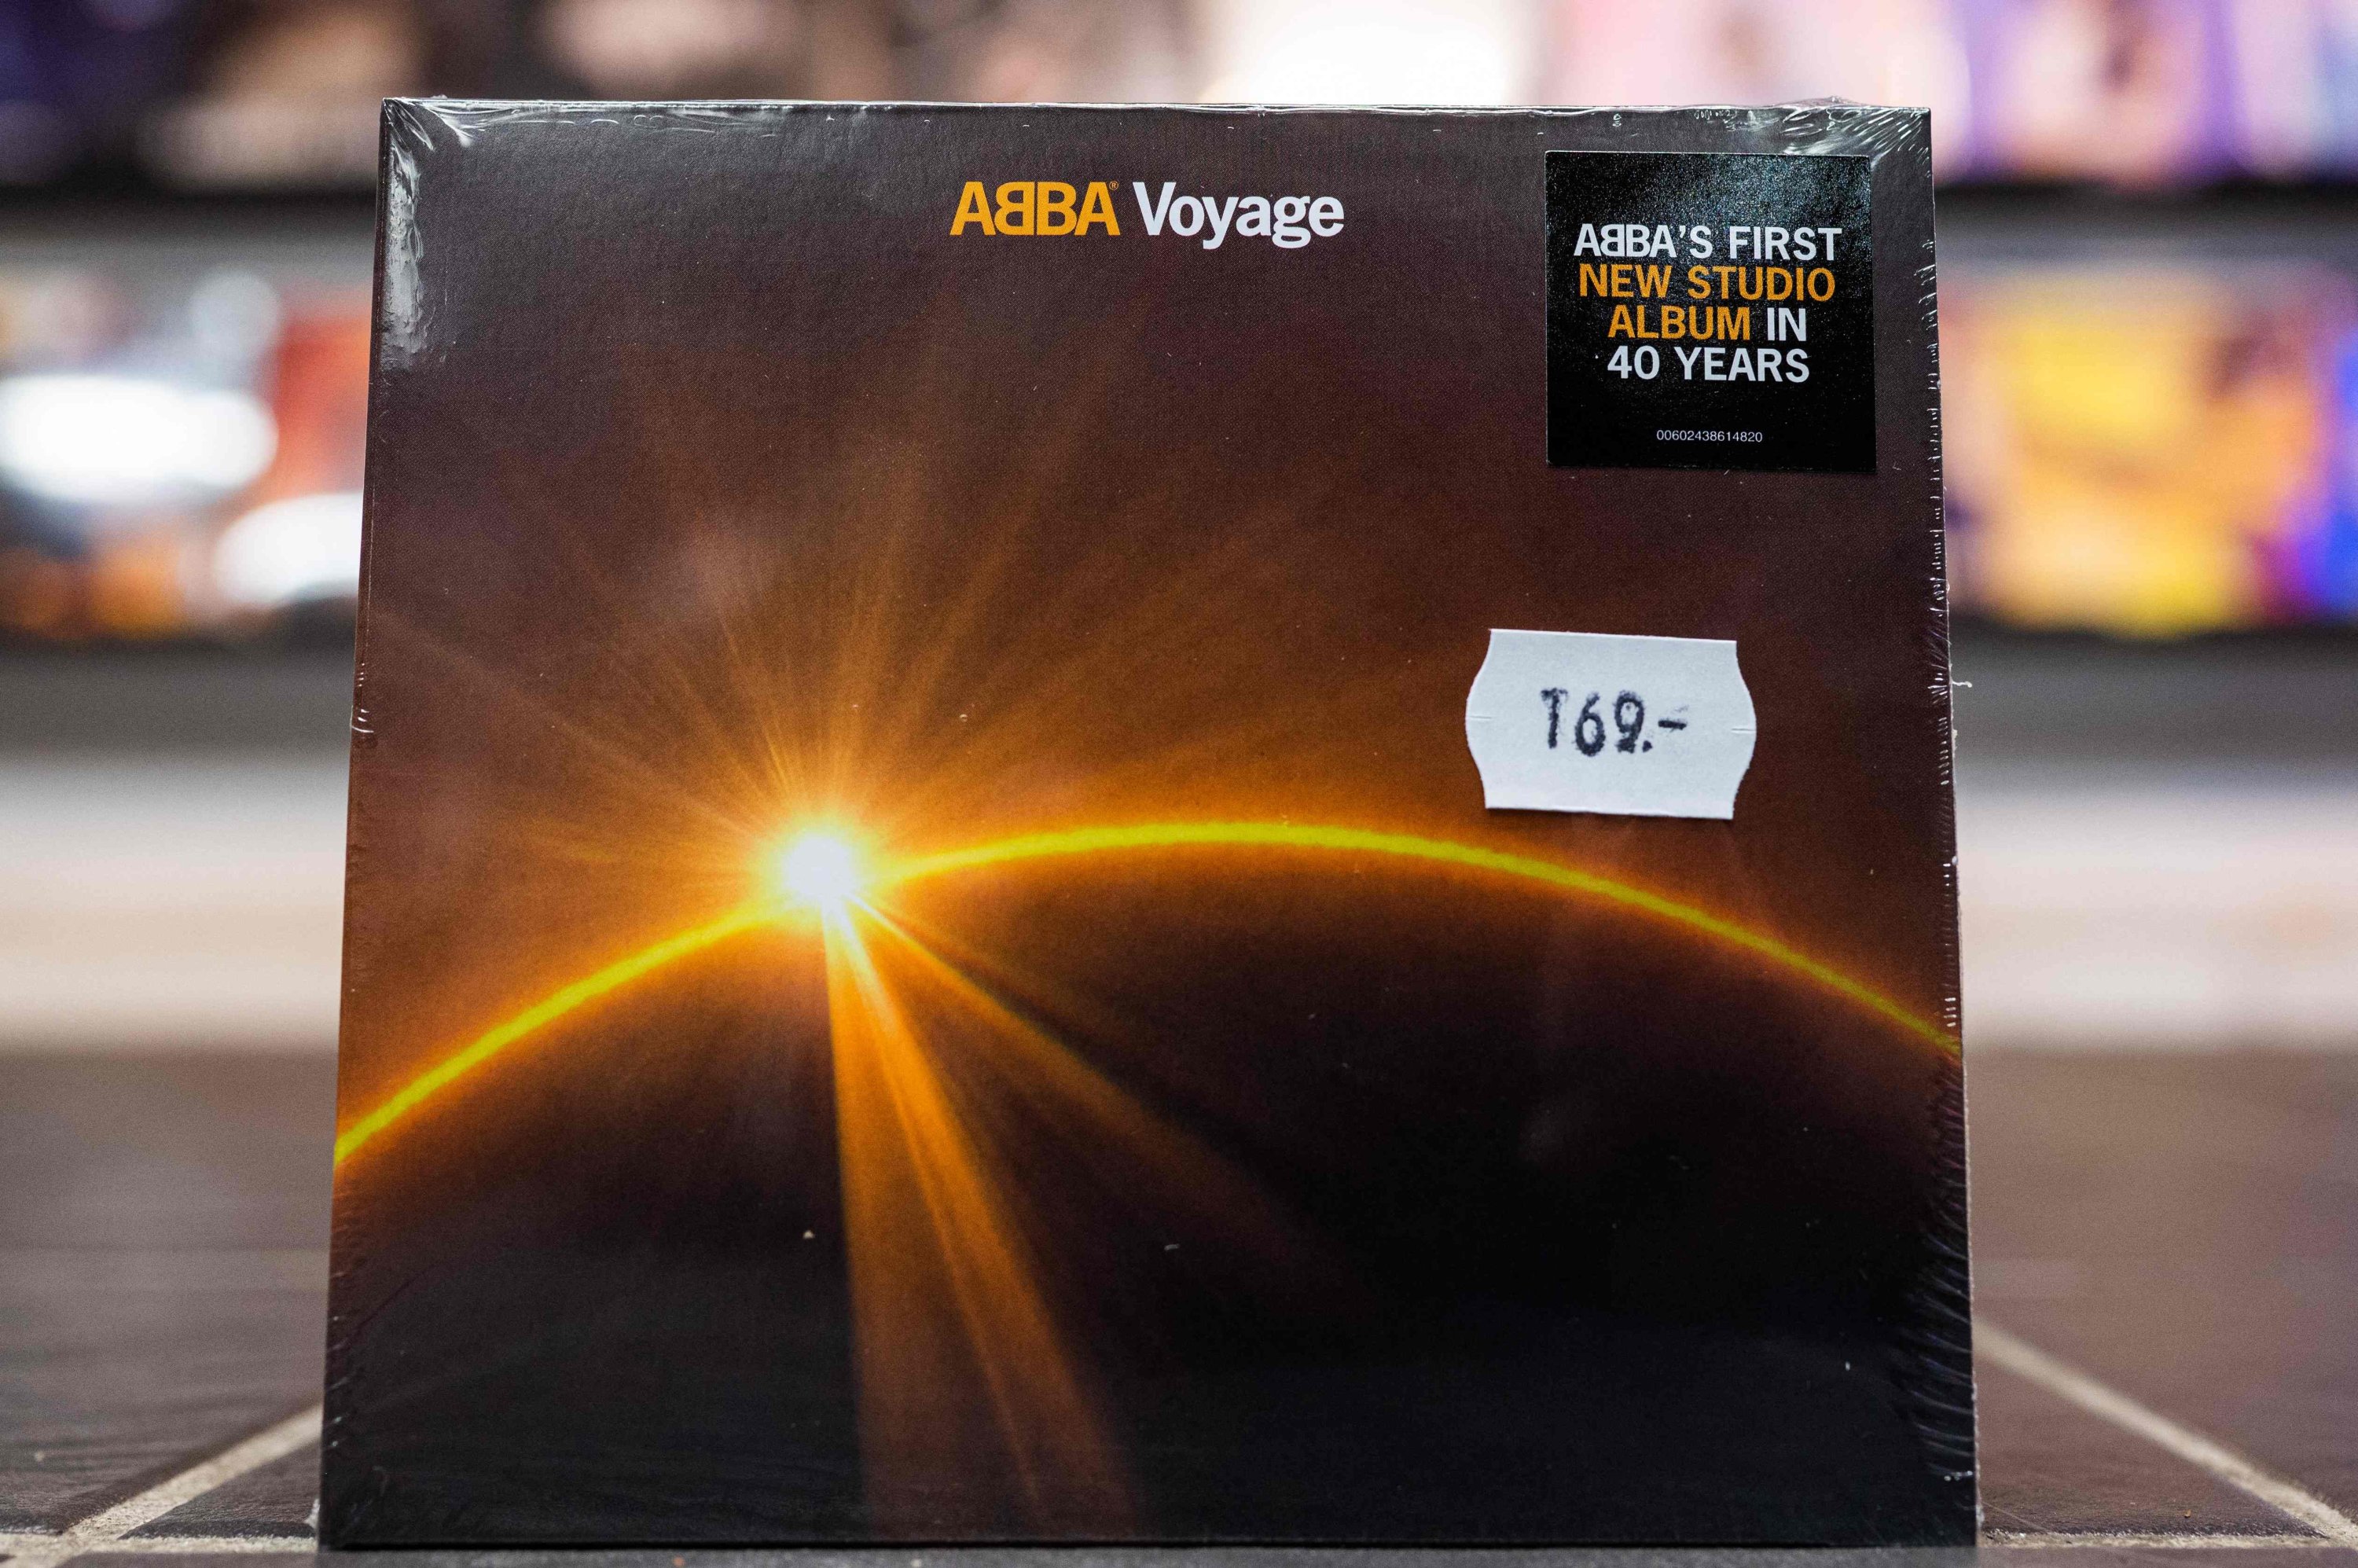 The new ABBA album 'Voyage' is on display at a local record store in Stockholm, Sweden, Nov. 4, 2021. (AFP Photo)